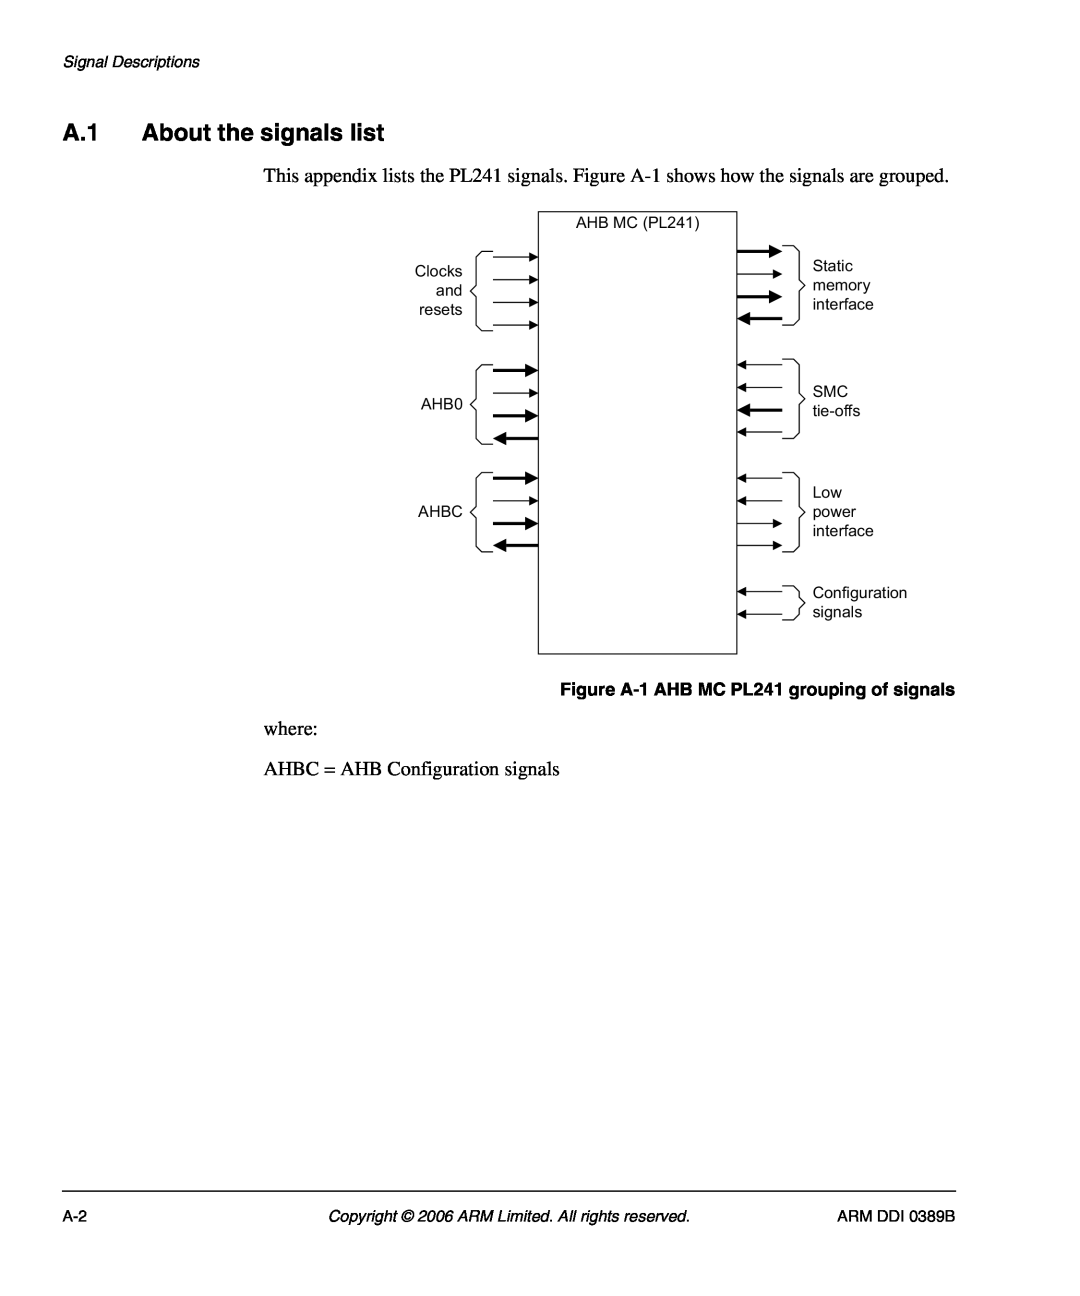 SMC Networks manual A.1 About the signals list, Figure A-1 AHB MC PL241 grouping of signals, Signal Descriptions, Orfnv 